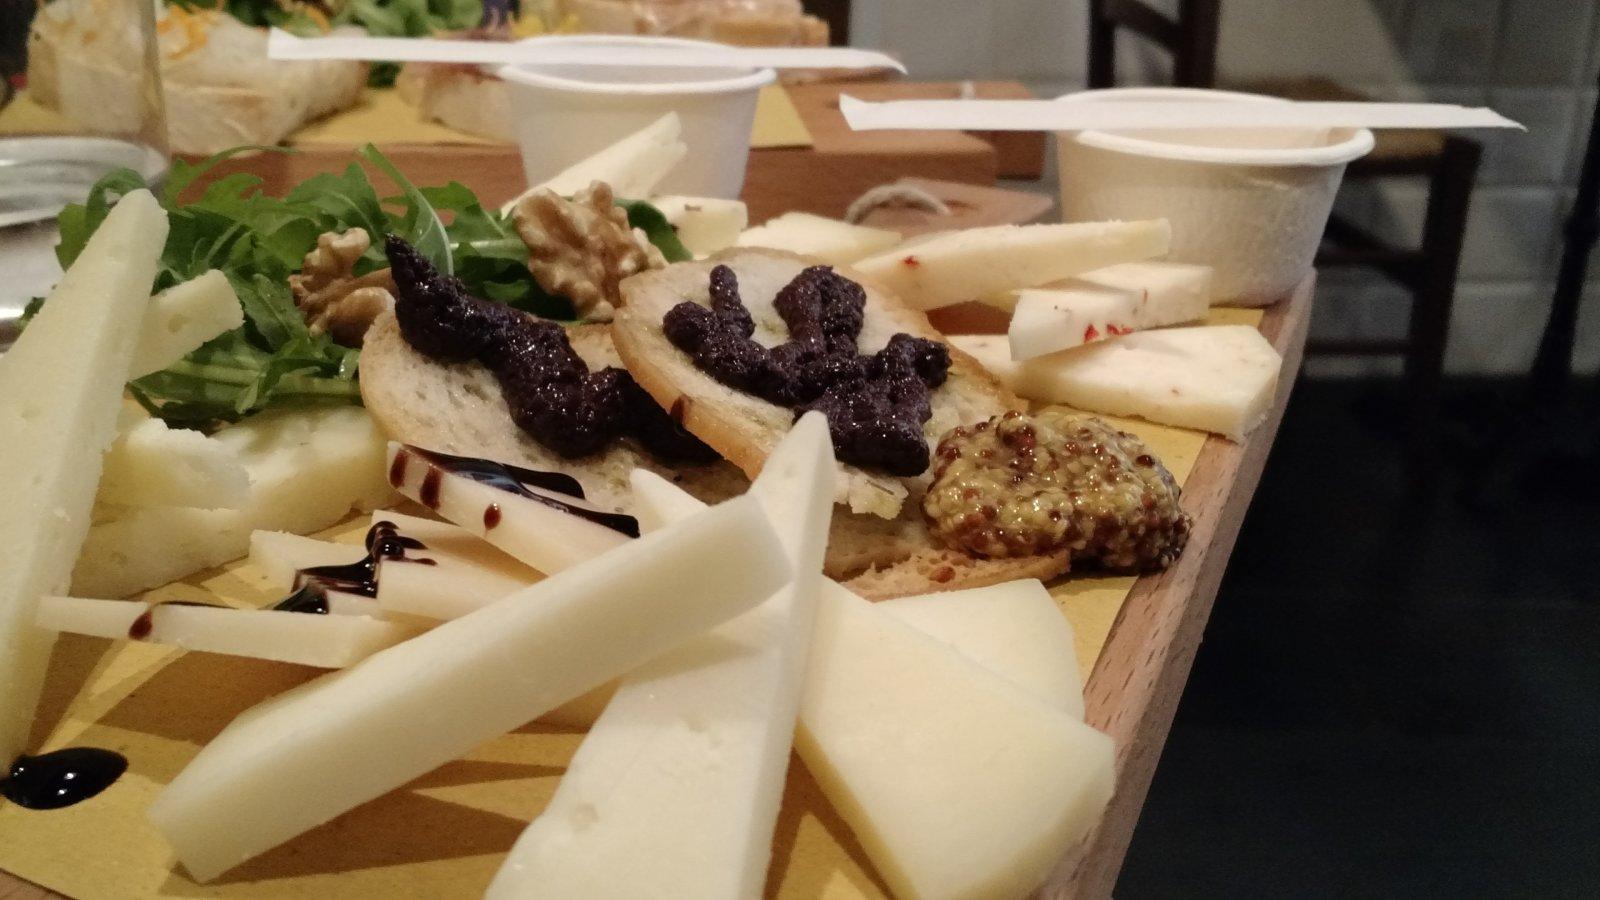 Show-off pictures from Florence. This was a cheese plate.